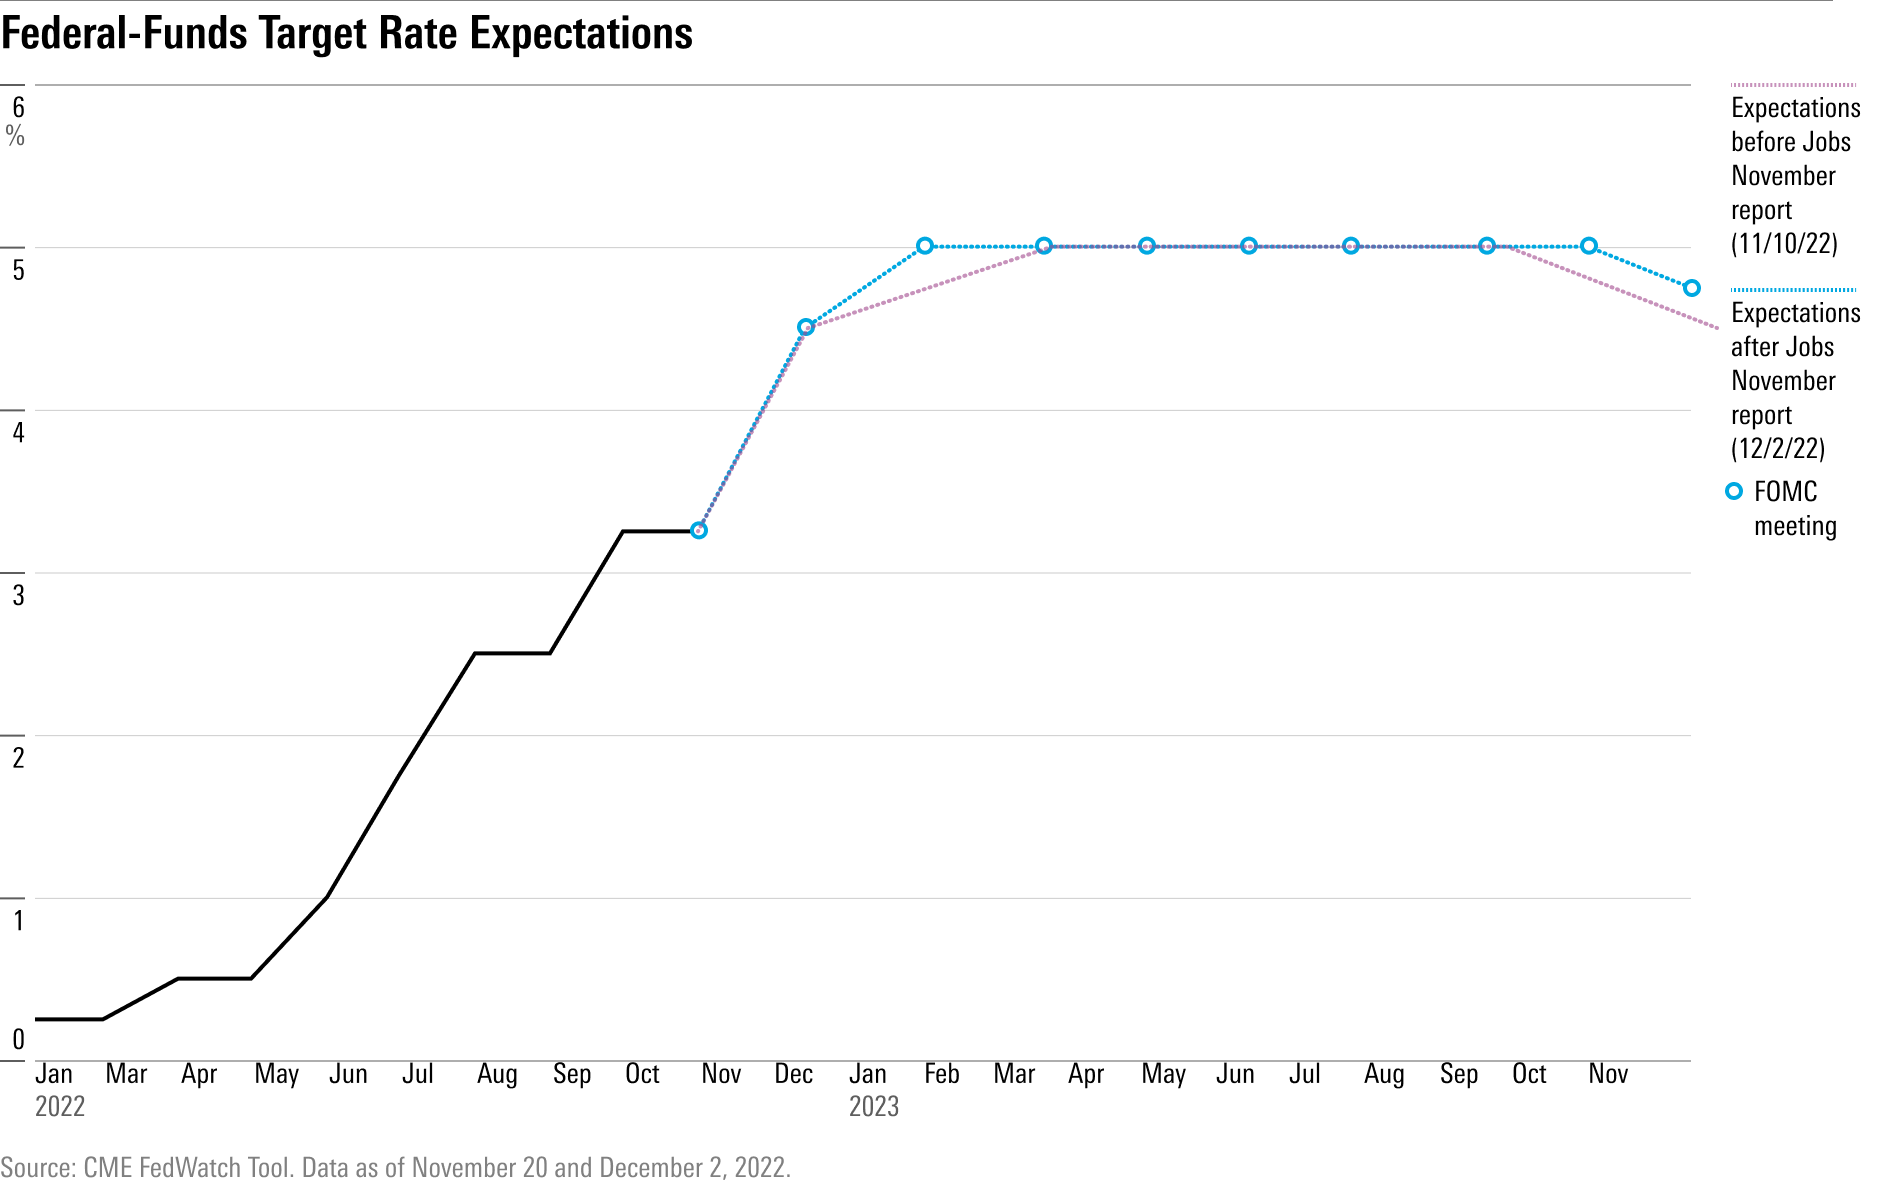 Changing expectations for upcoming federal-funds target rates before and after the November jobs report.